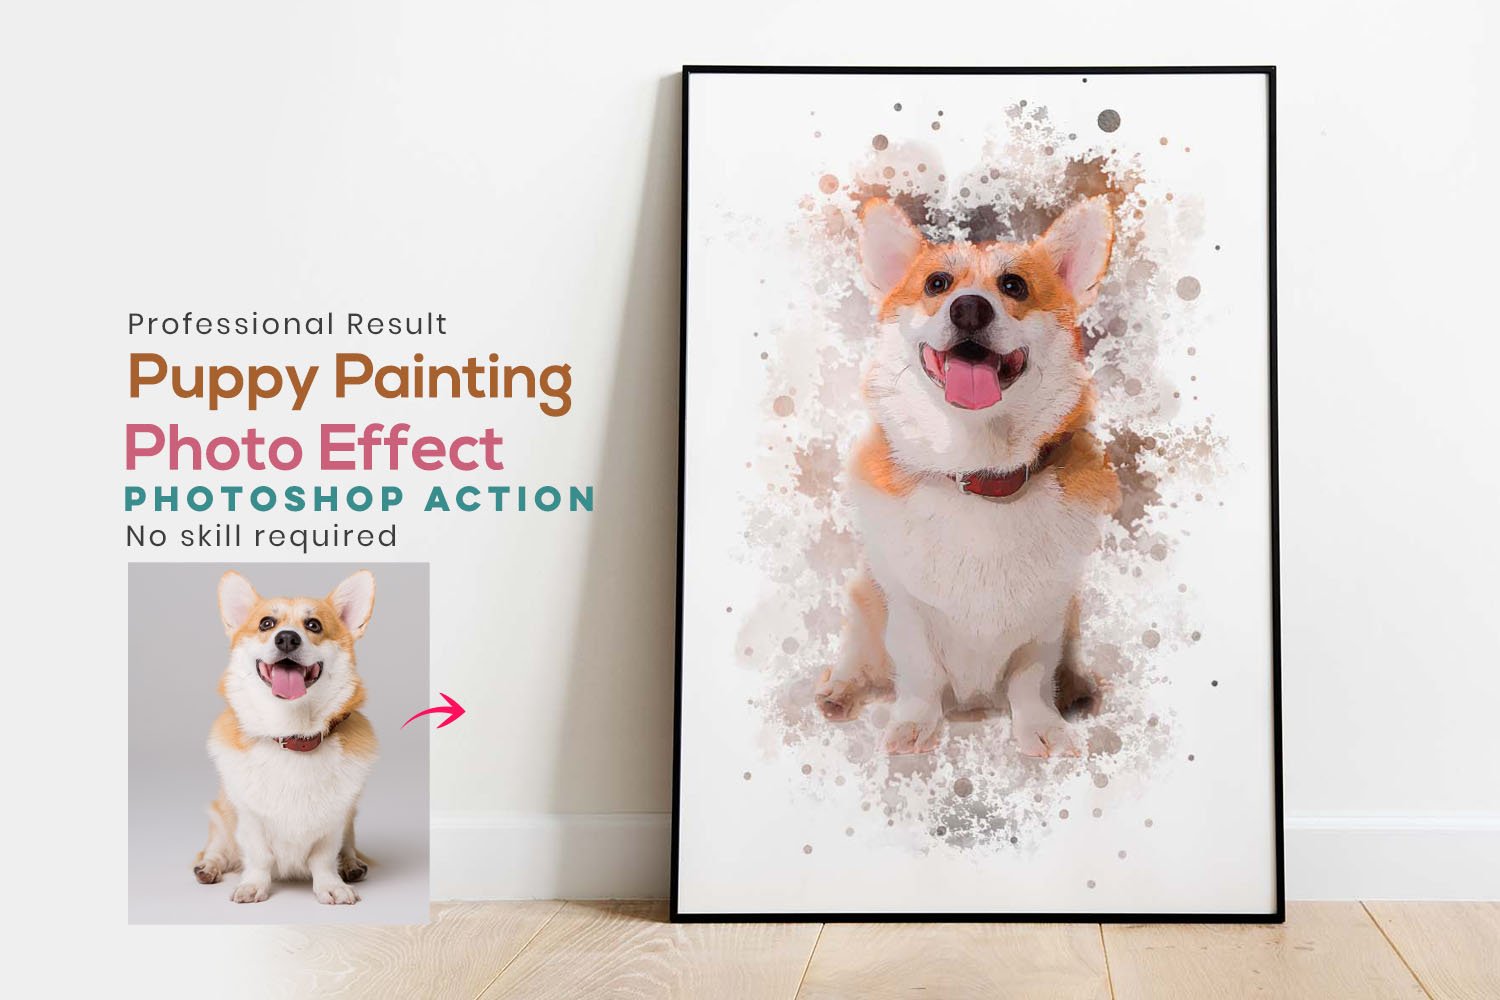 Puppy Painting Photoshop Actioncover image.